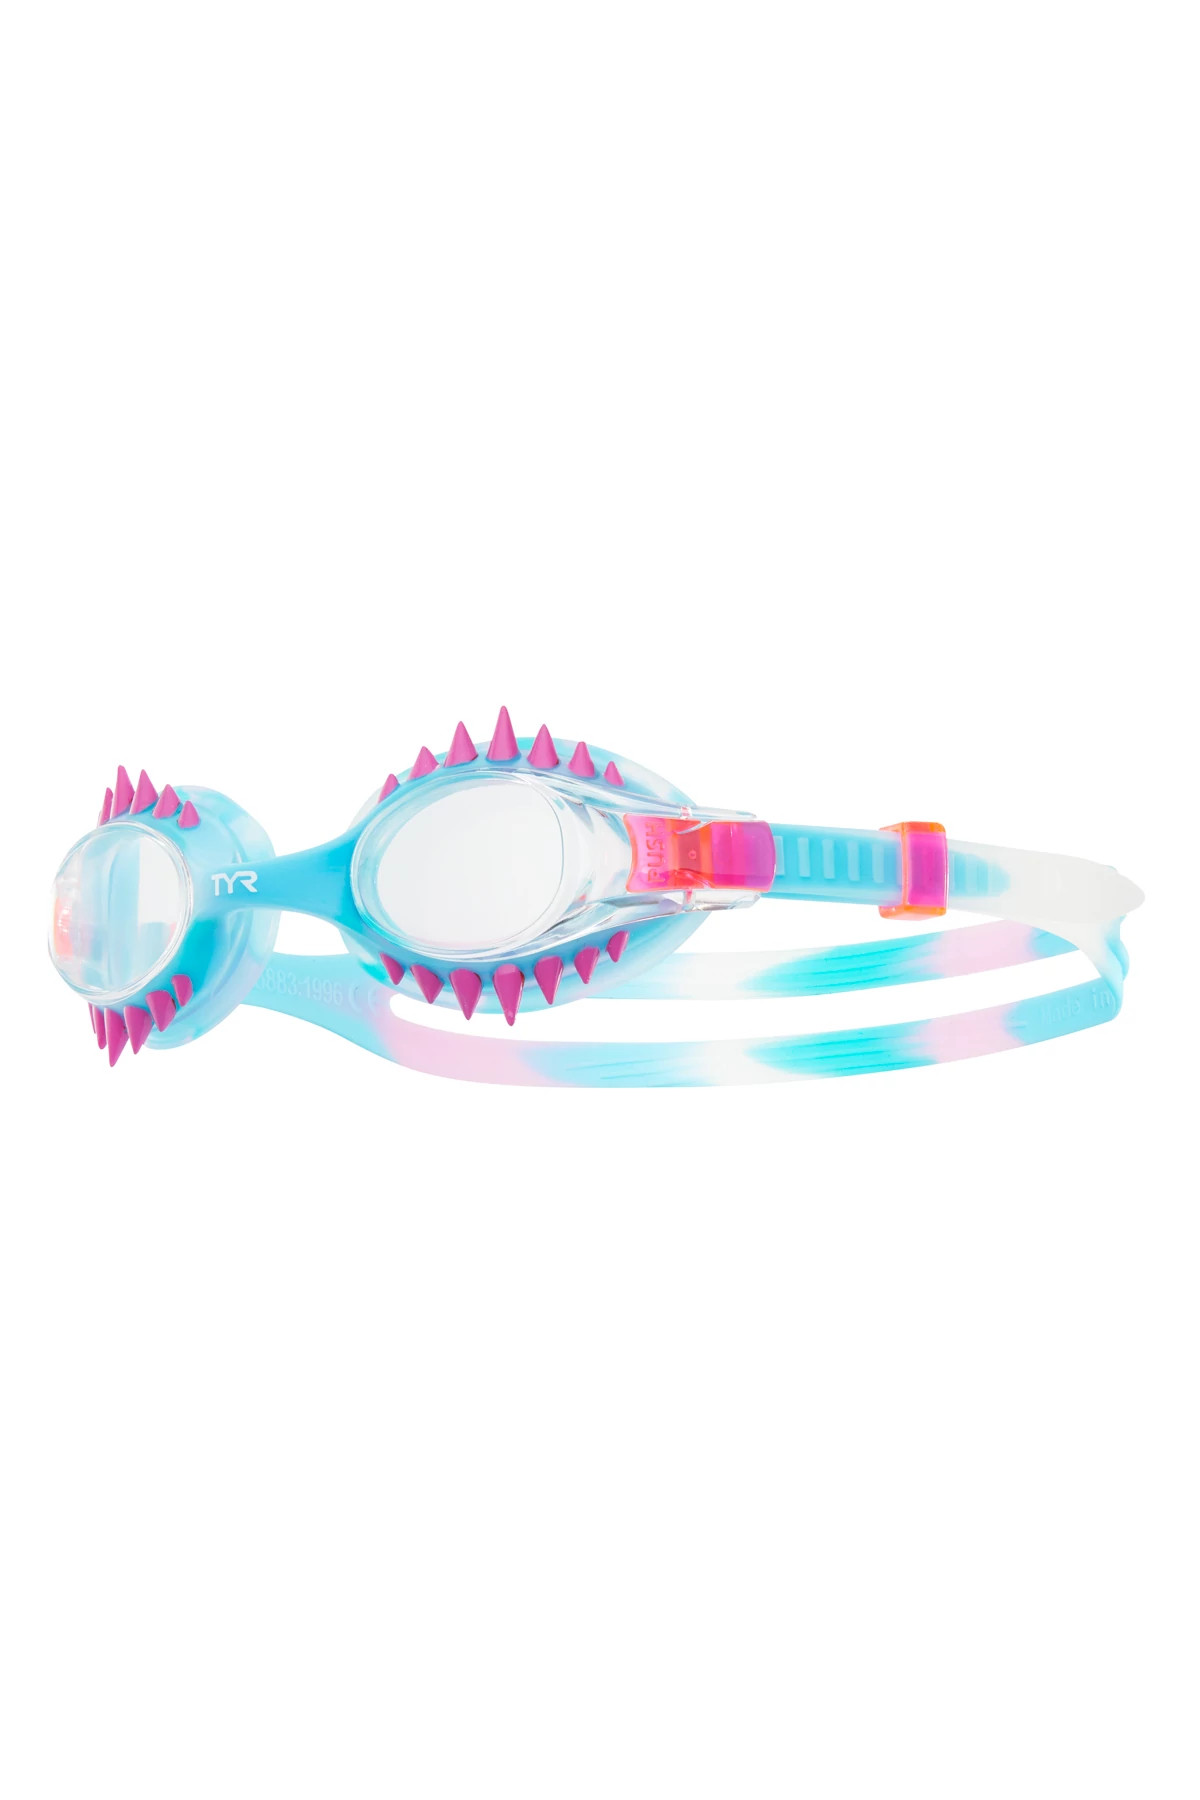 CLEAR/MINT Kids Swimple Spikes Tie Dye Swim Goggles image number 1